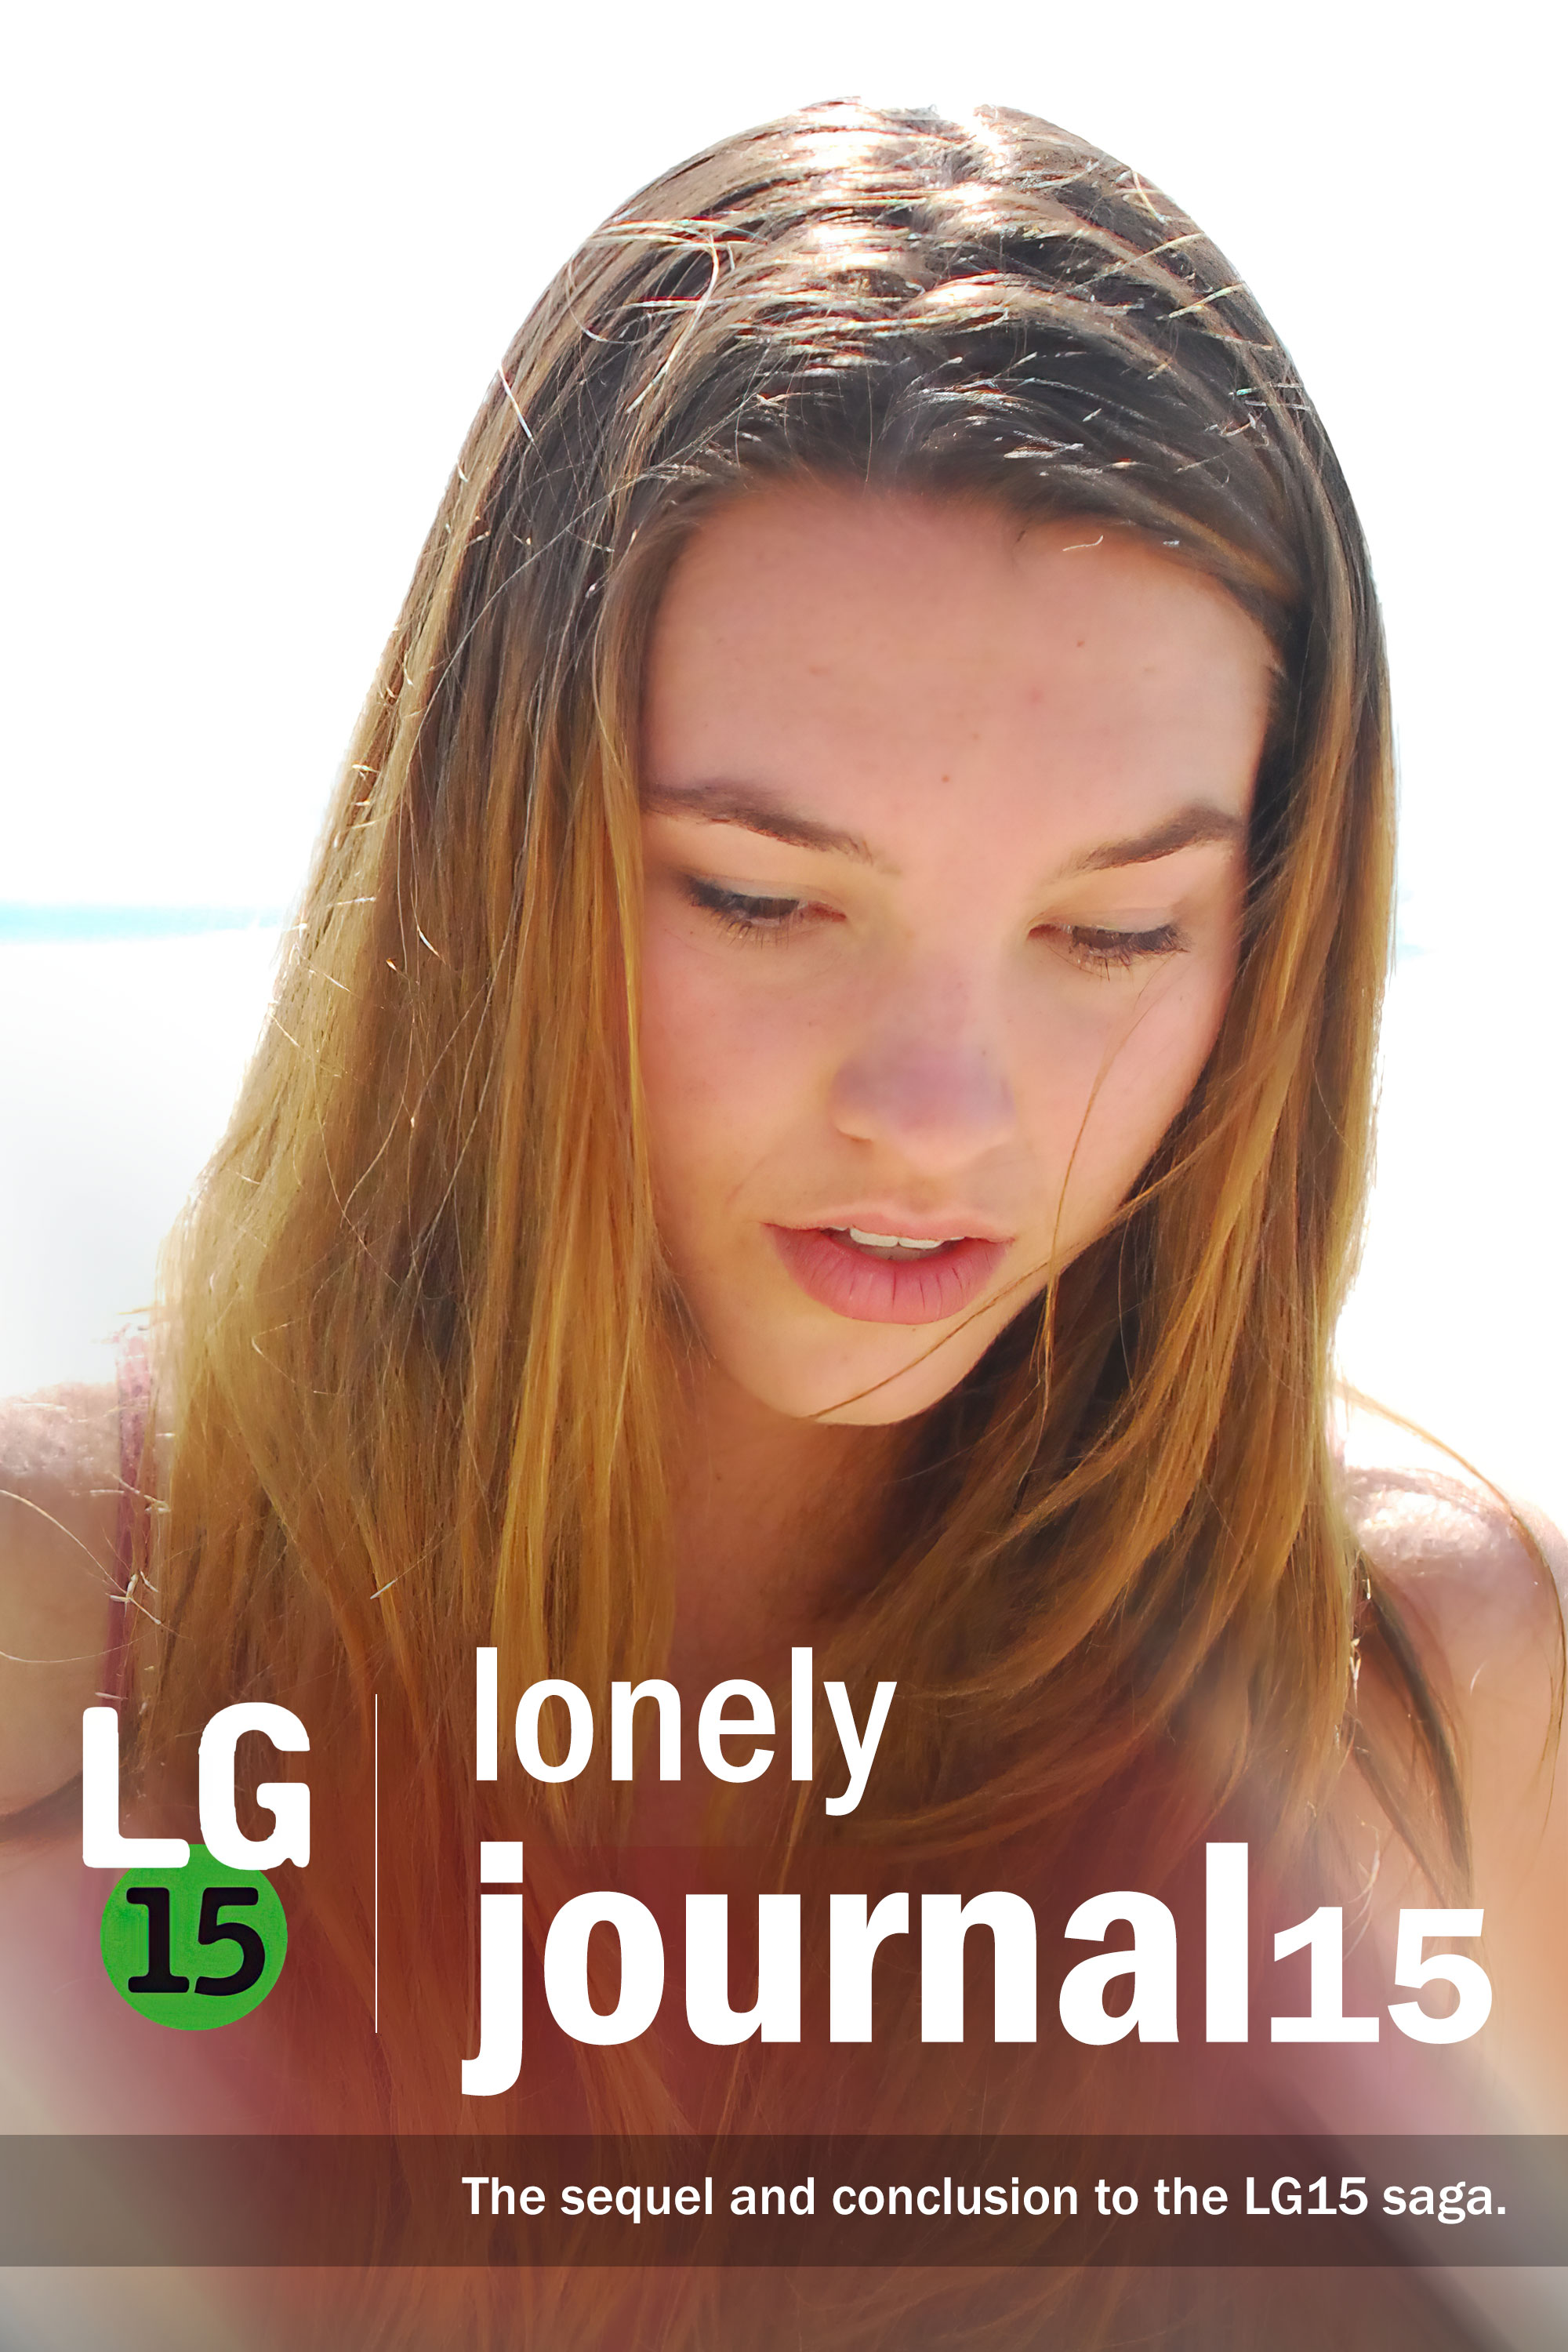 Another Lonelygirl15?